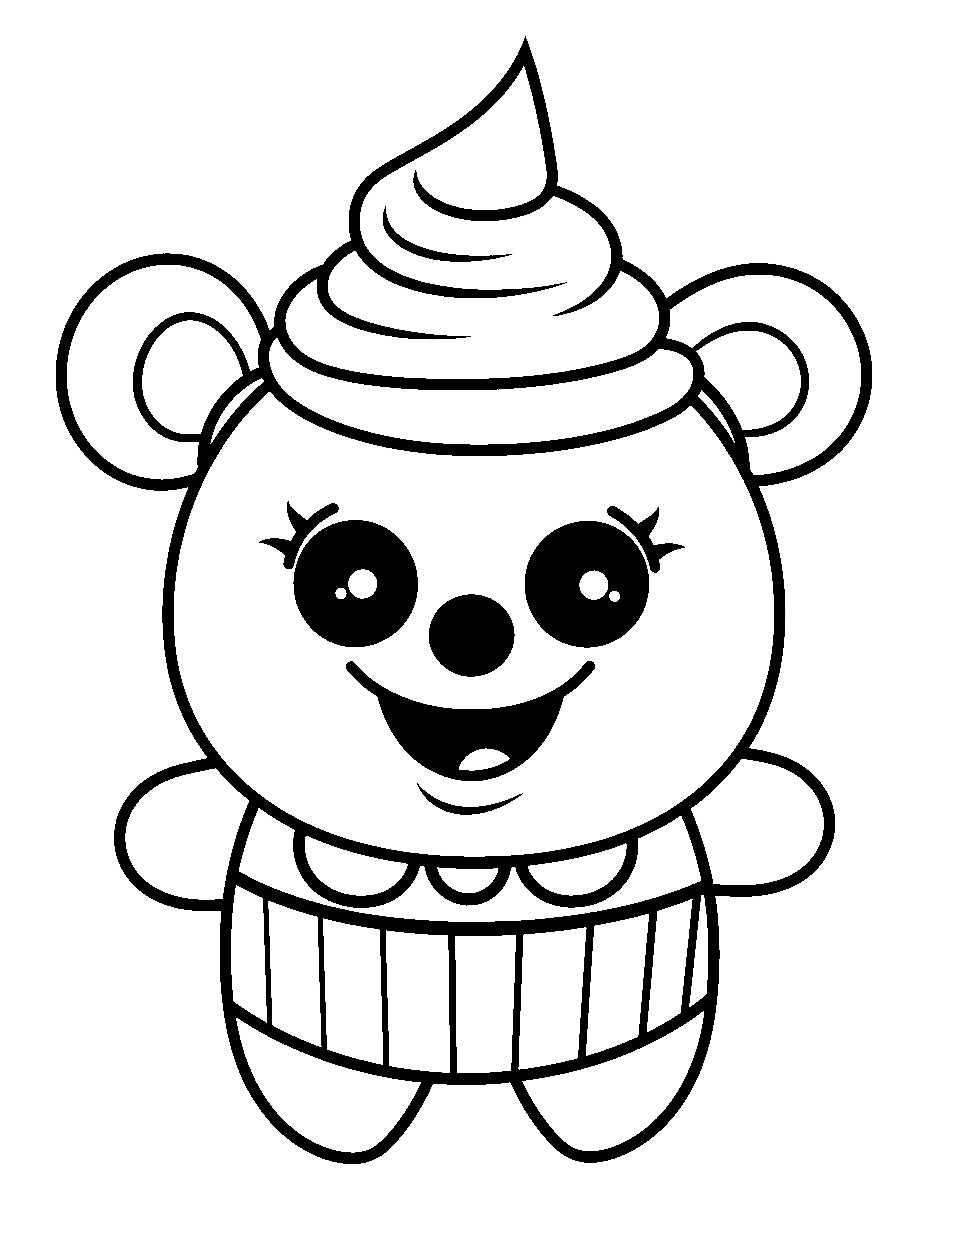 Easy Kawaii Cupcake Character Five Nights at Freddys Coloring Page - An easy-to-draw kawaii-style cupcake character with big, cute eyes.